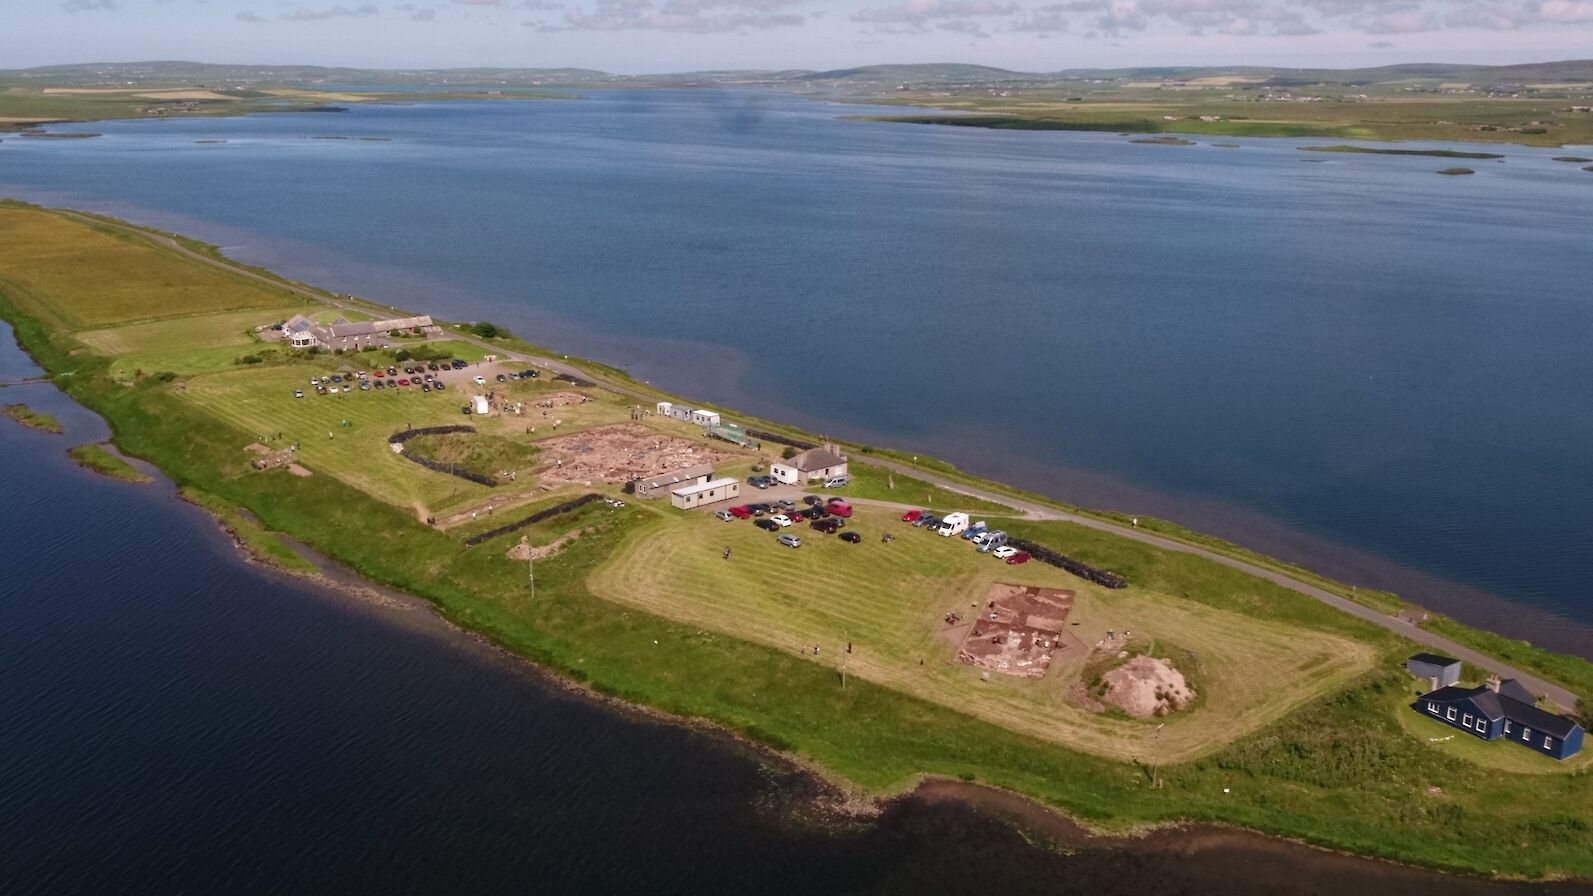 Aerial view of the Ness of Brodgar - image by Scott Pike